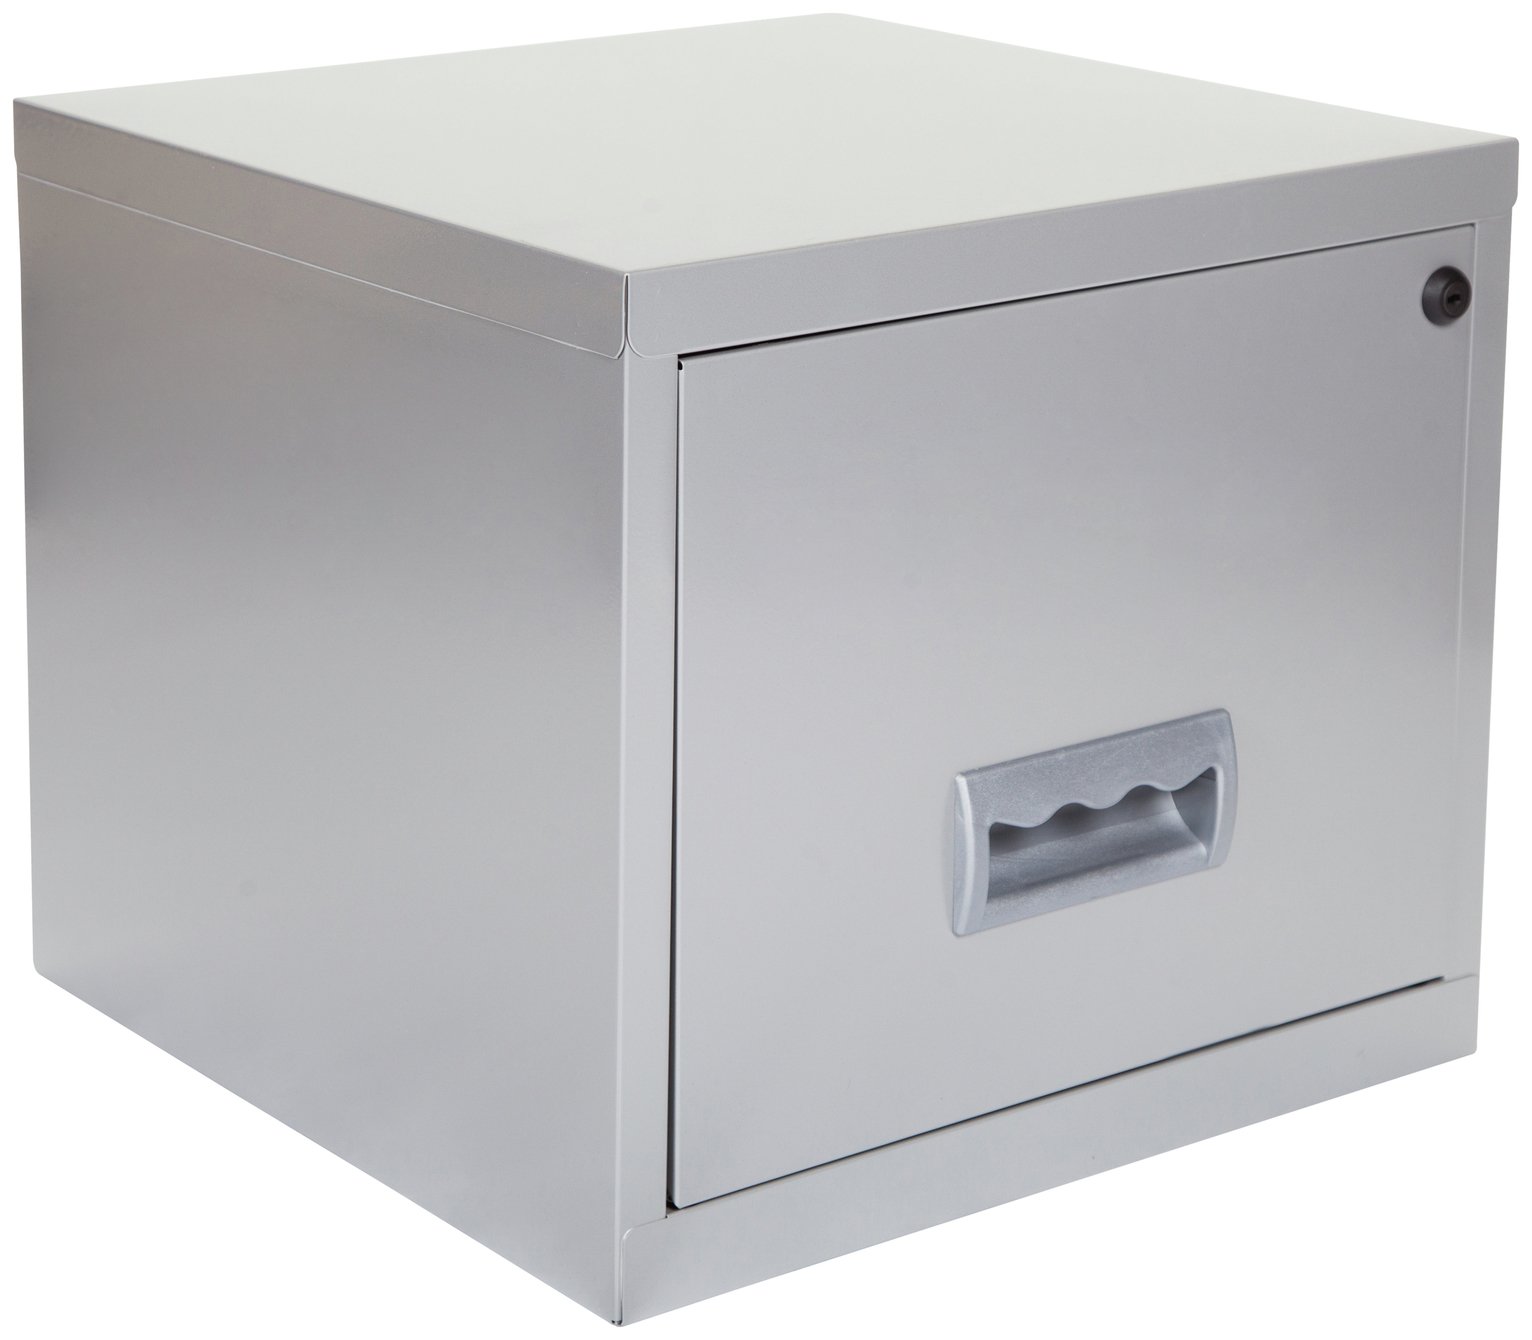 Pierre Henry 1 Drawer Filing Cabinet - Silver